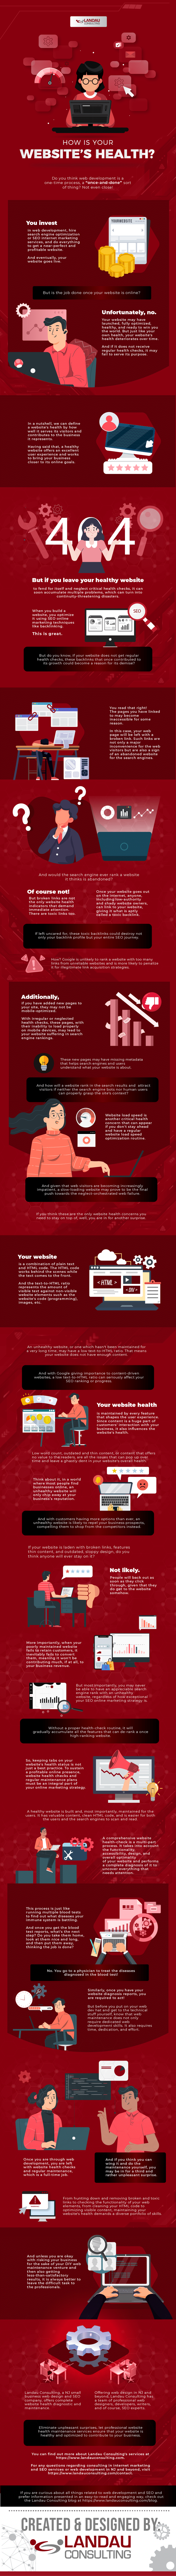 How_is_Your_Website’s_Health_infographic_image